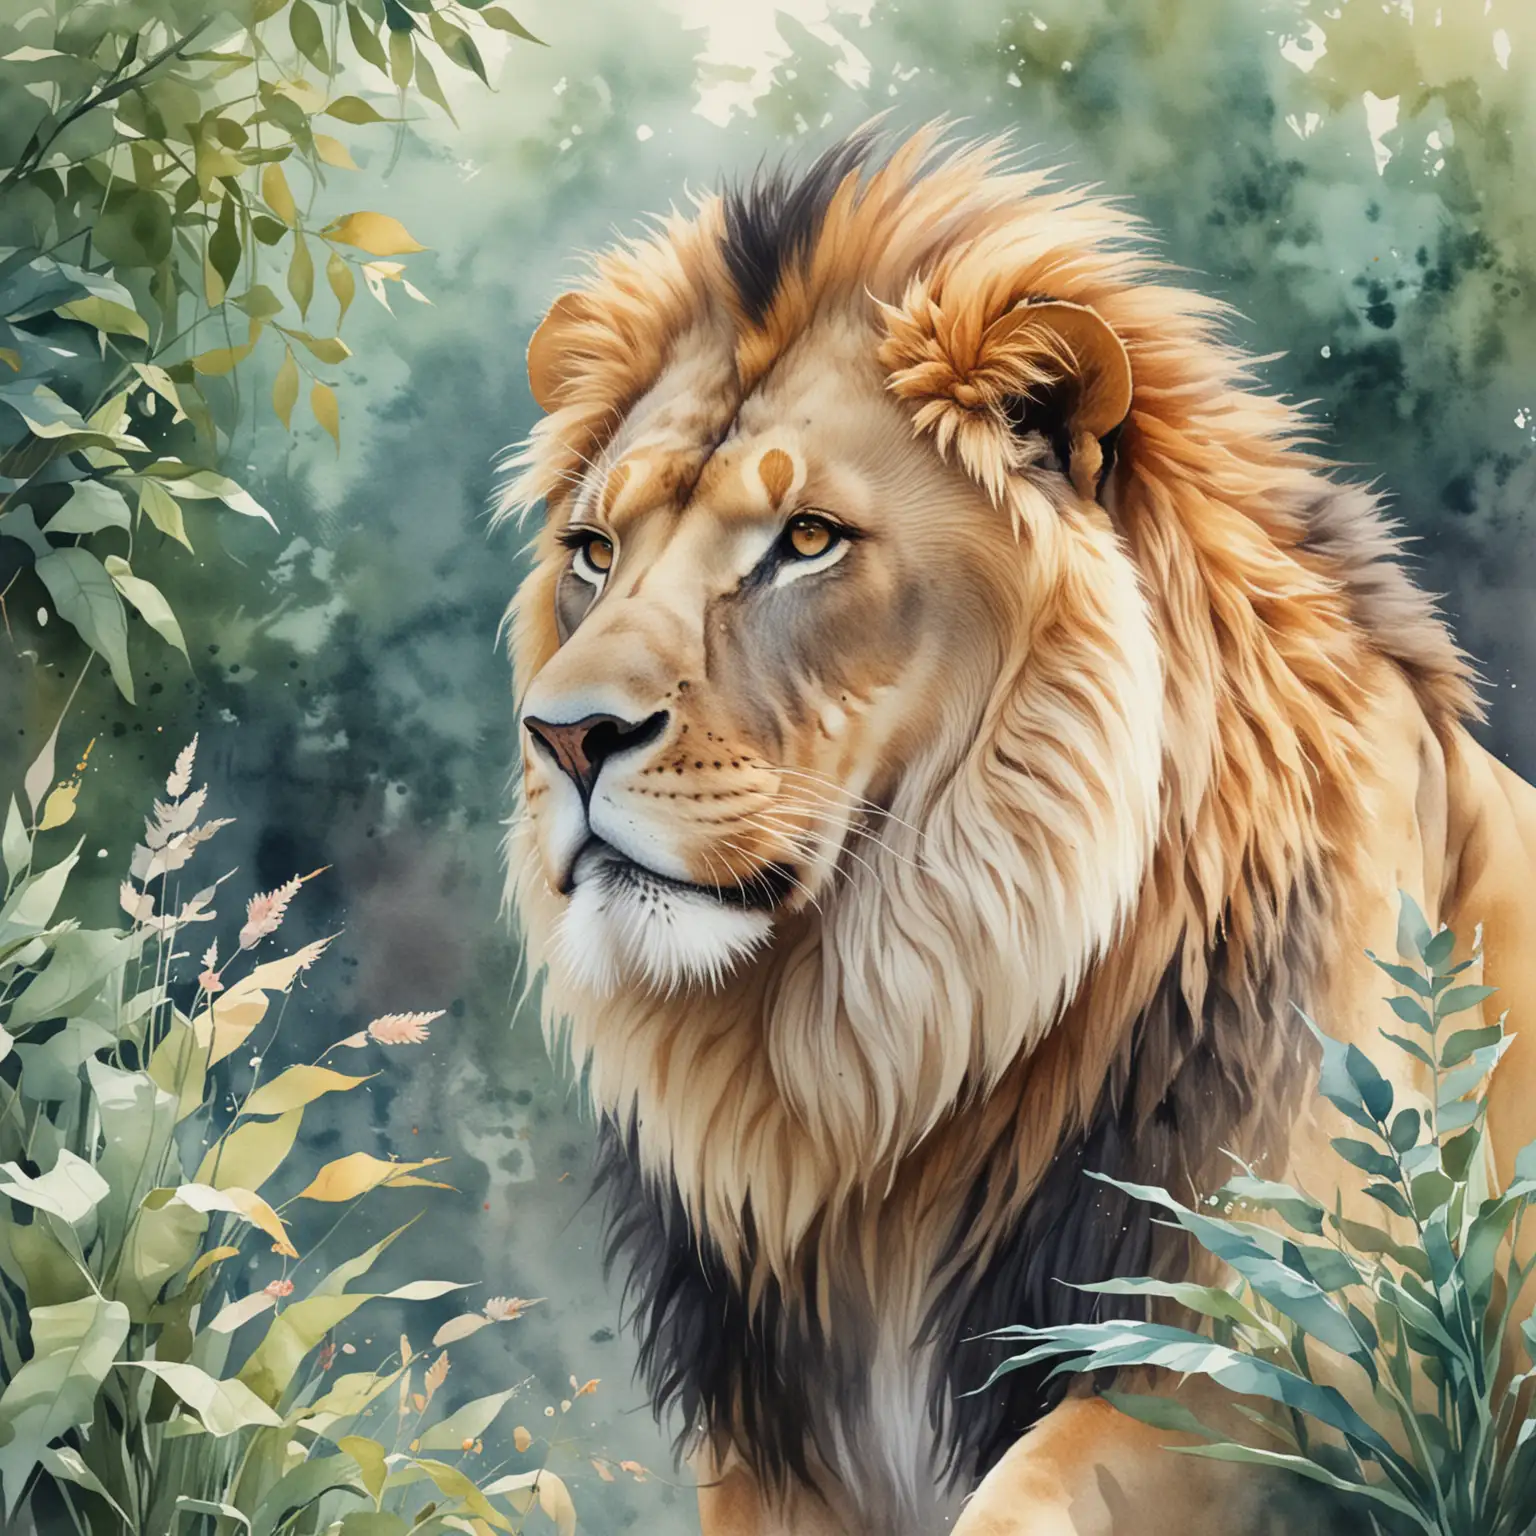 Ethereal Lion in a Zoo Subtle Watercolor Portrait